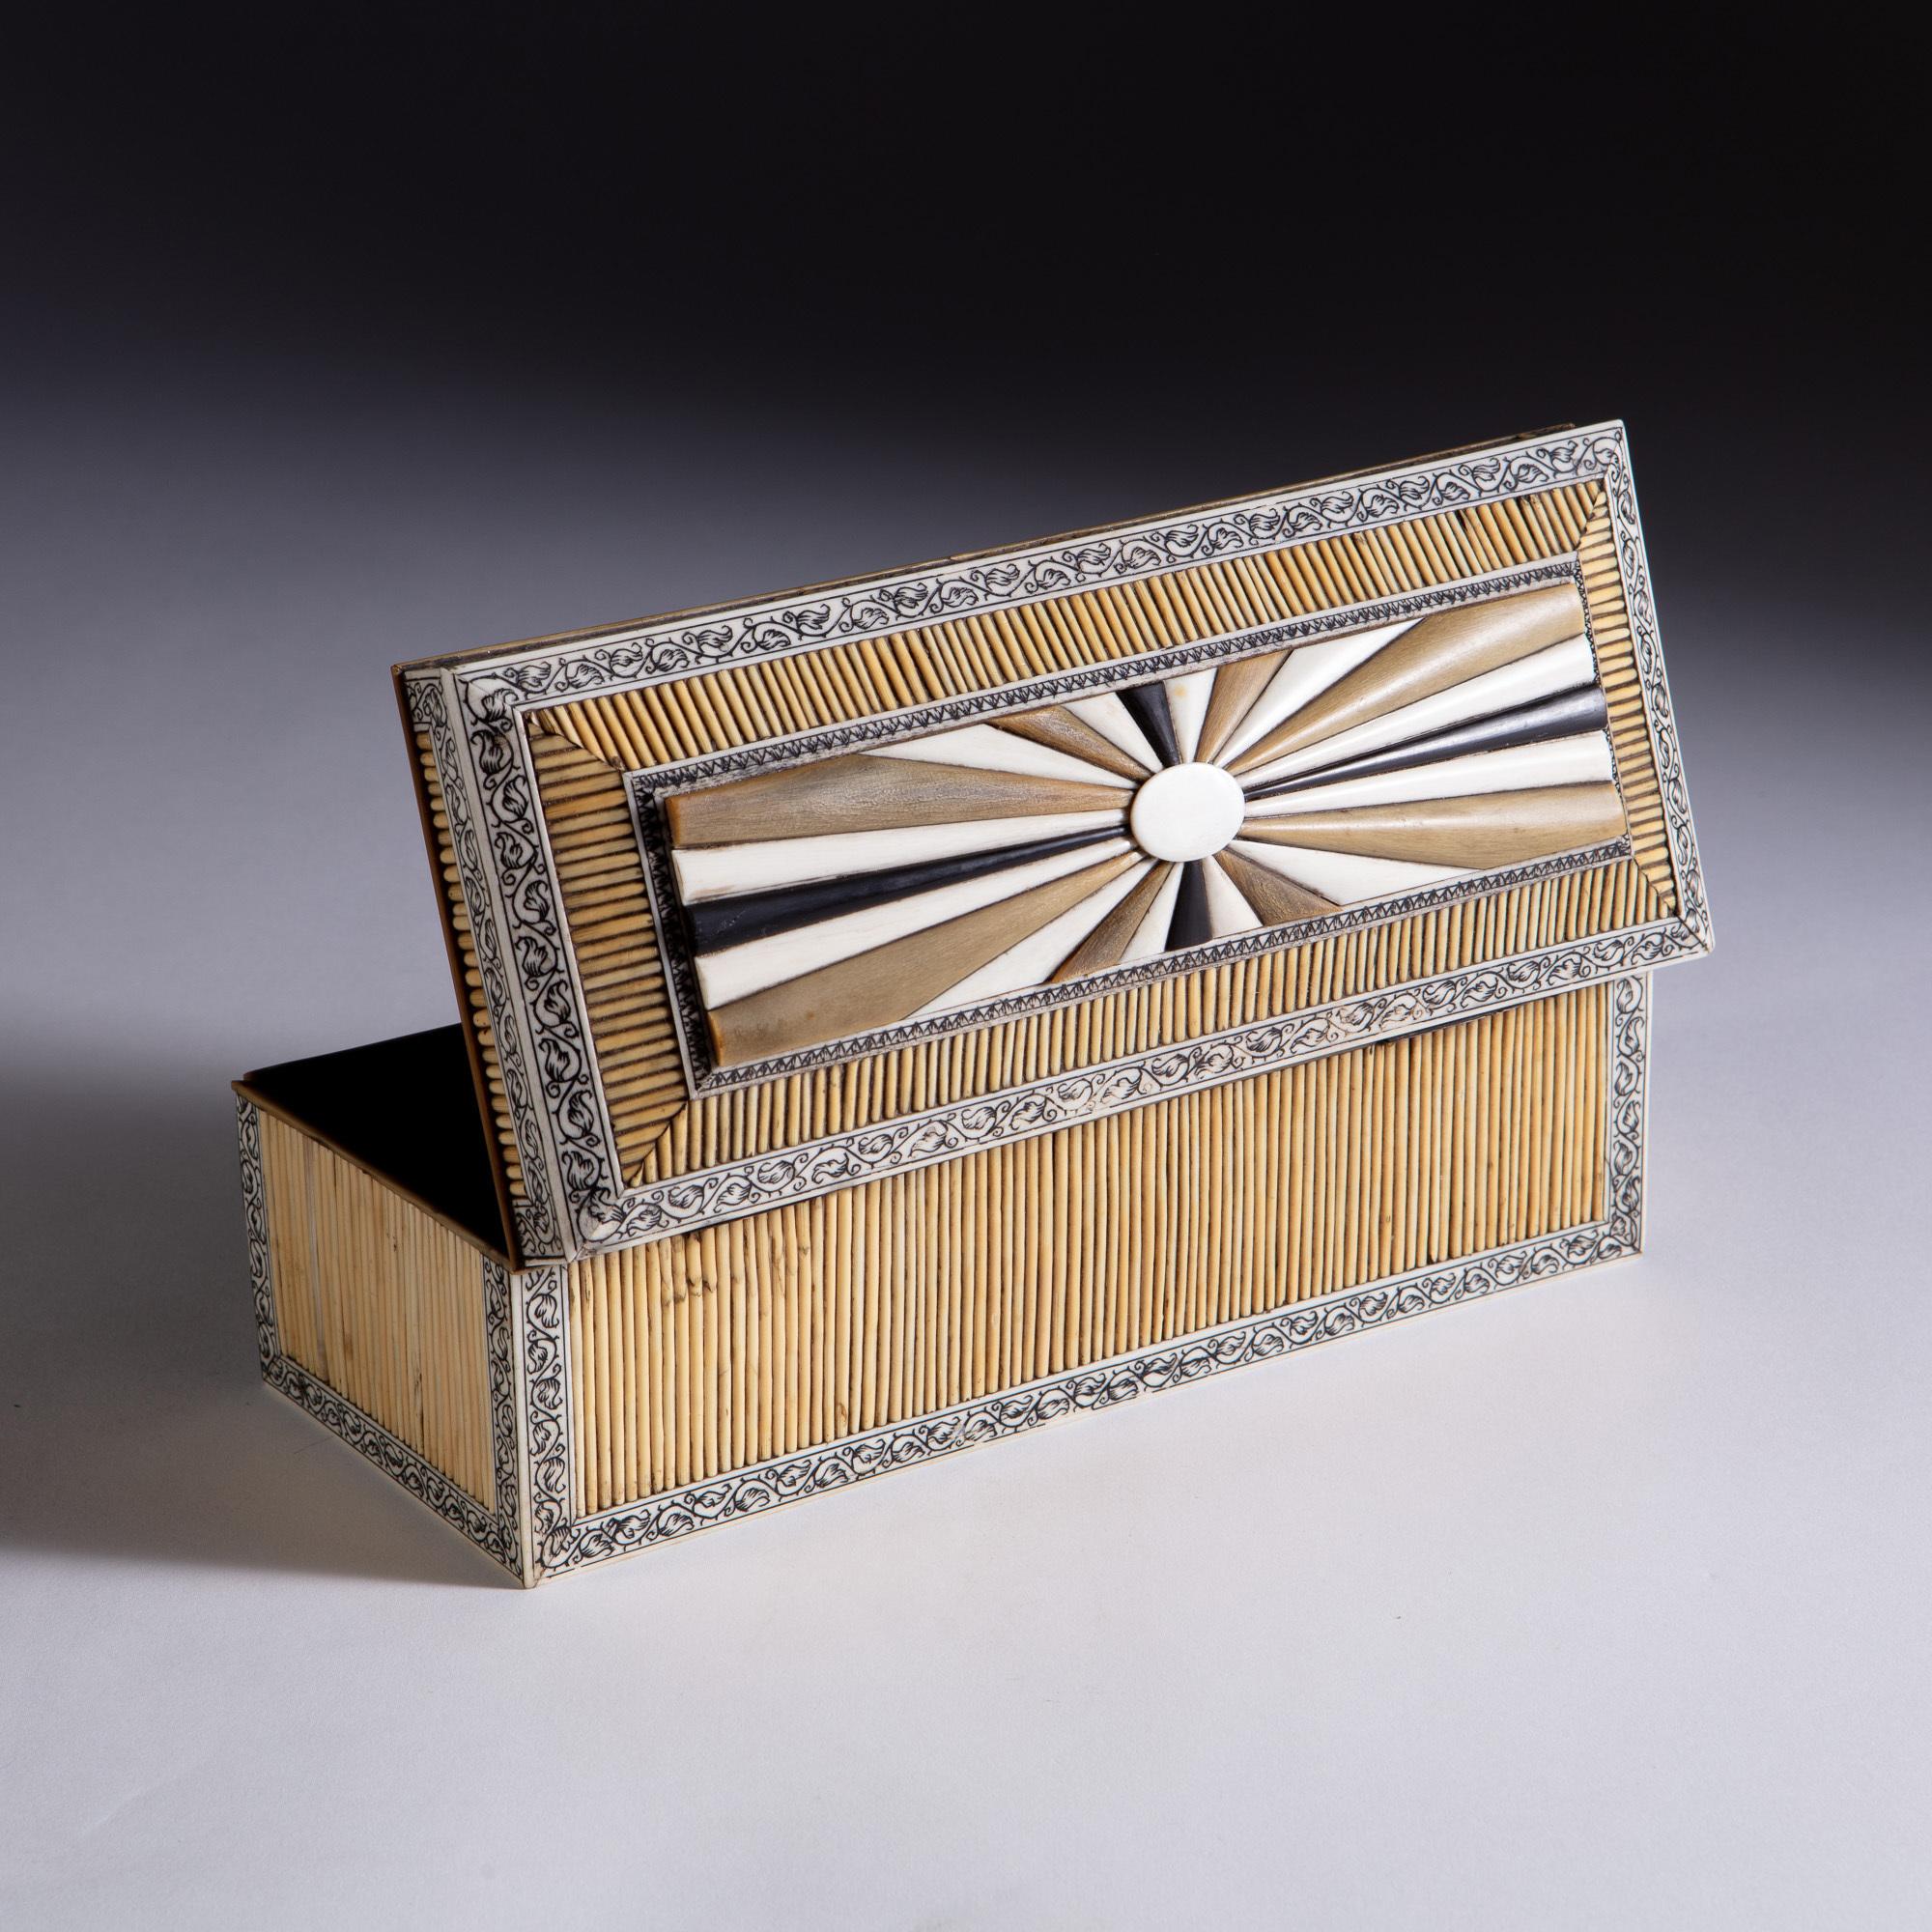 Anglo Indian porcupine quill box.